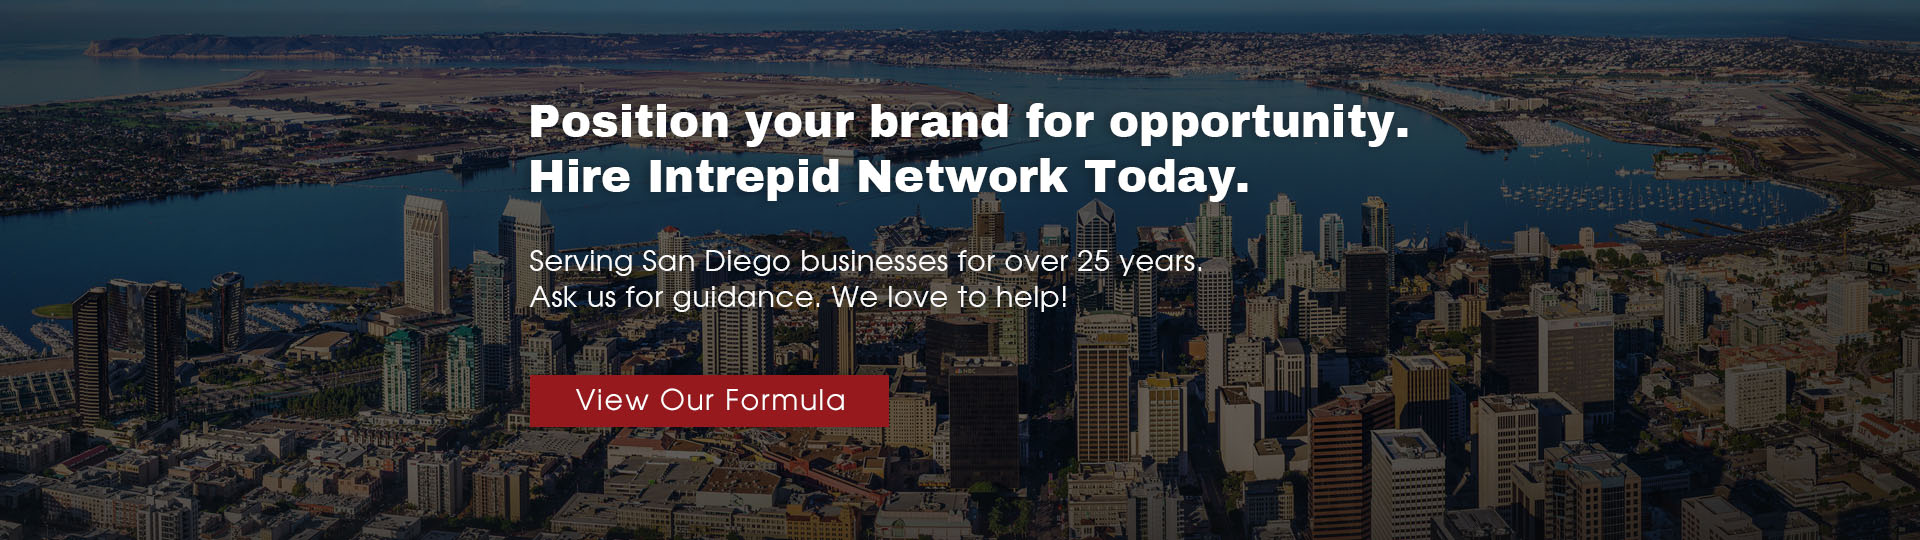 Partner with Intrepid Network for Success